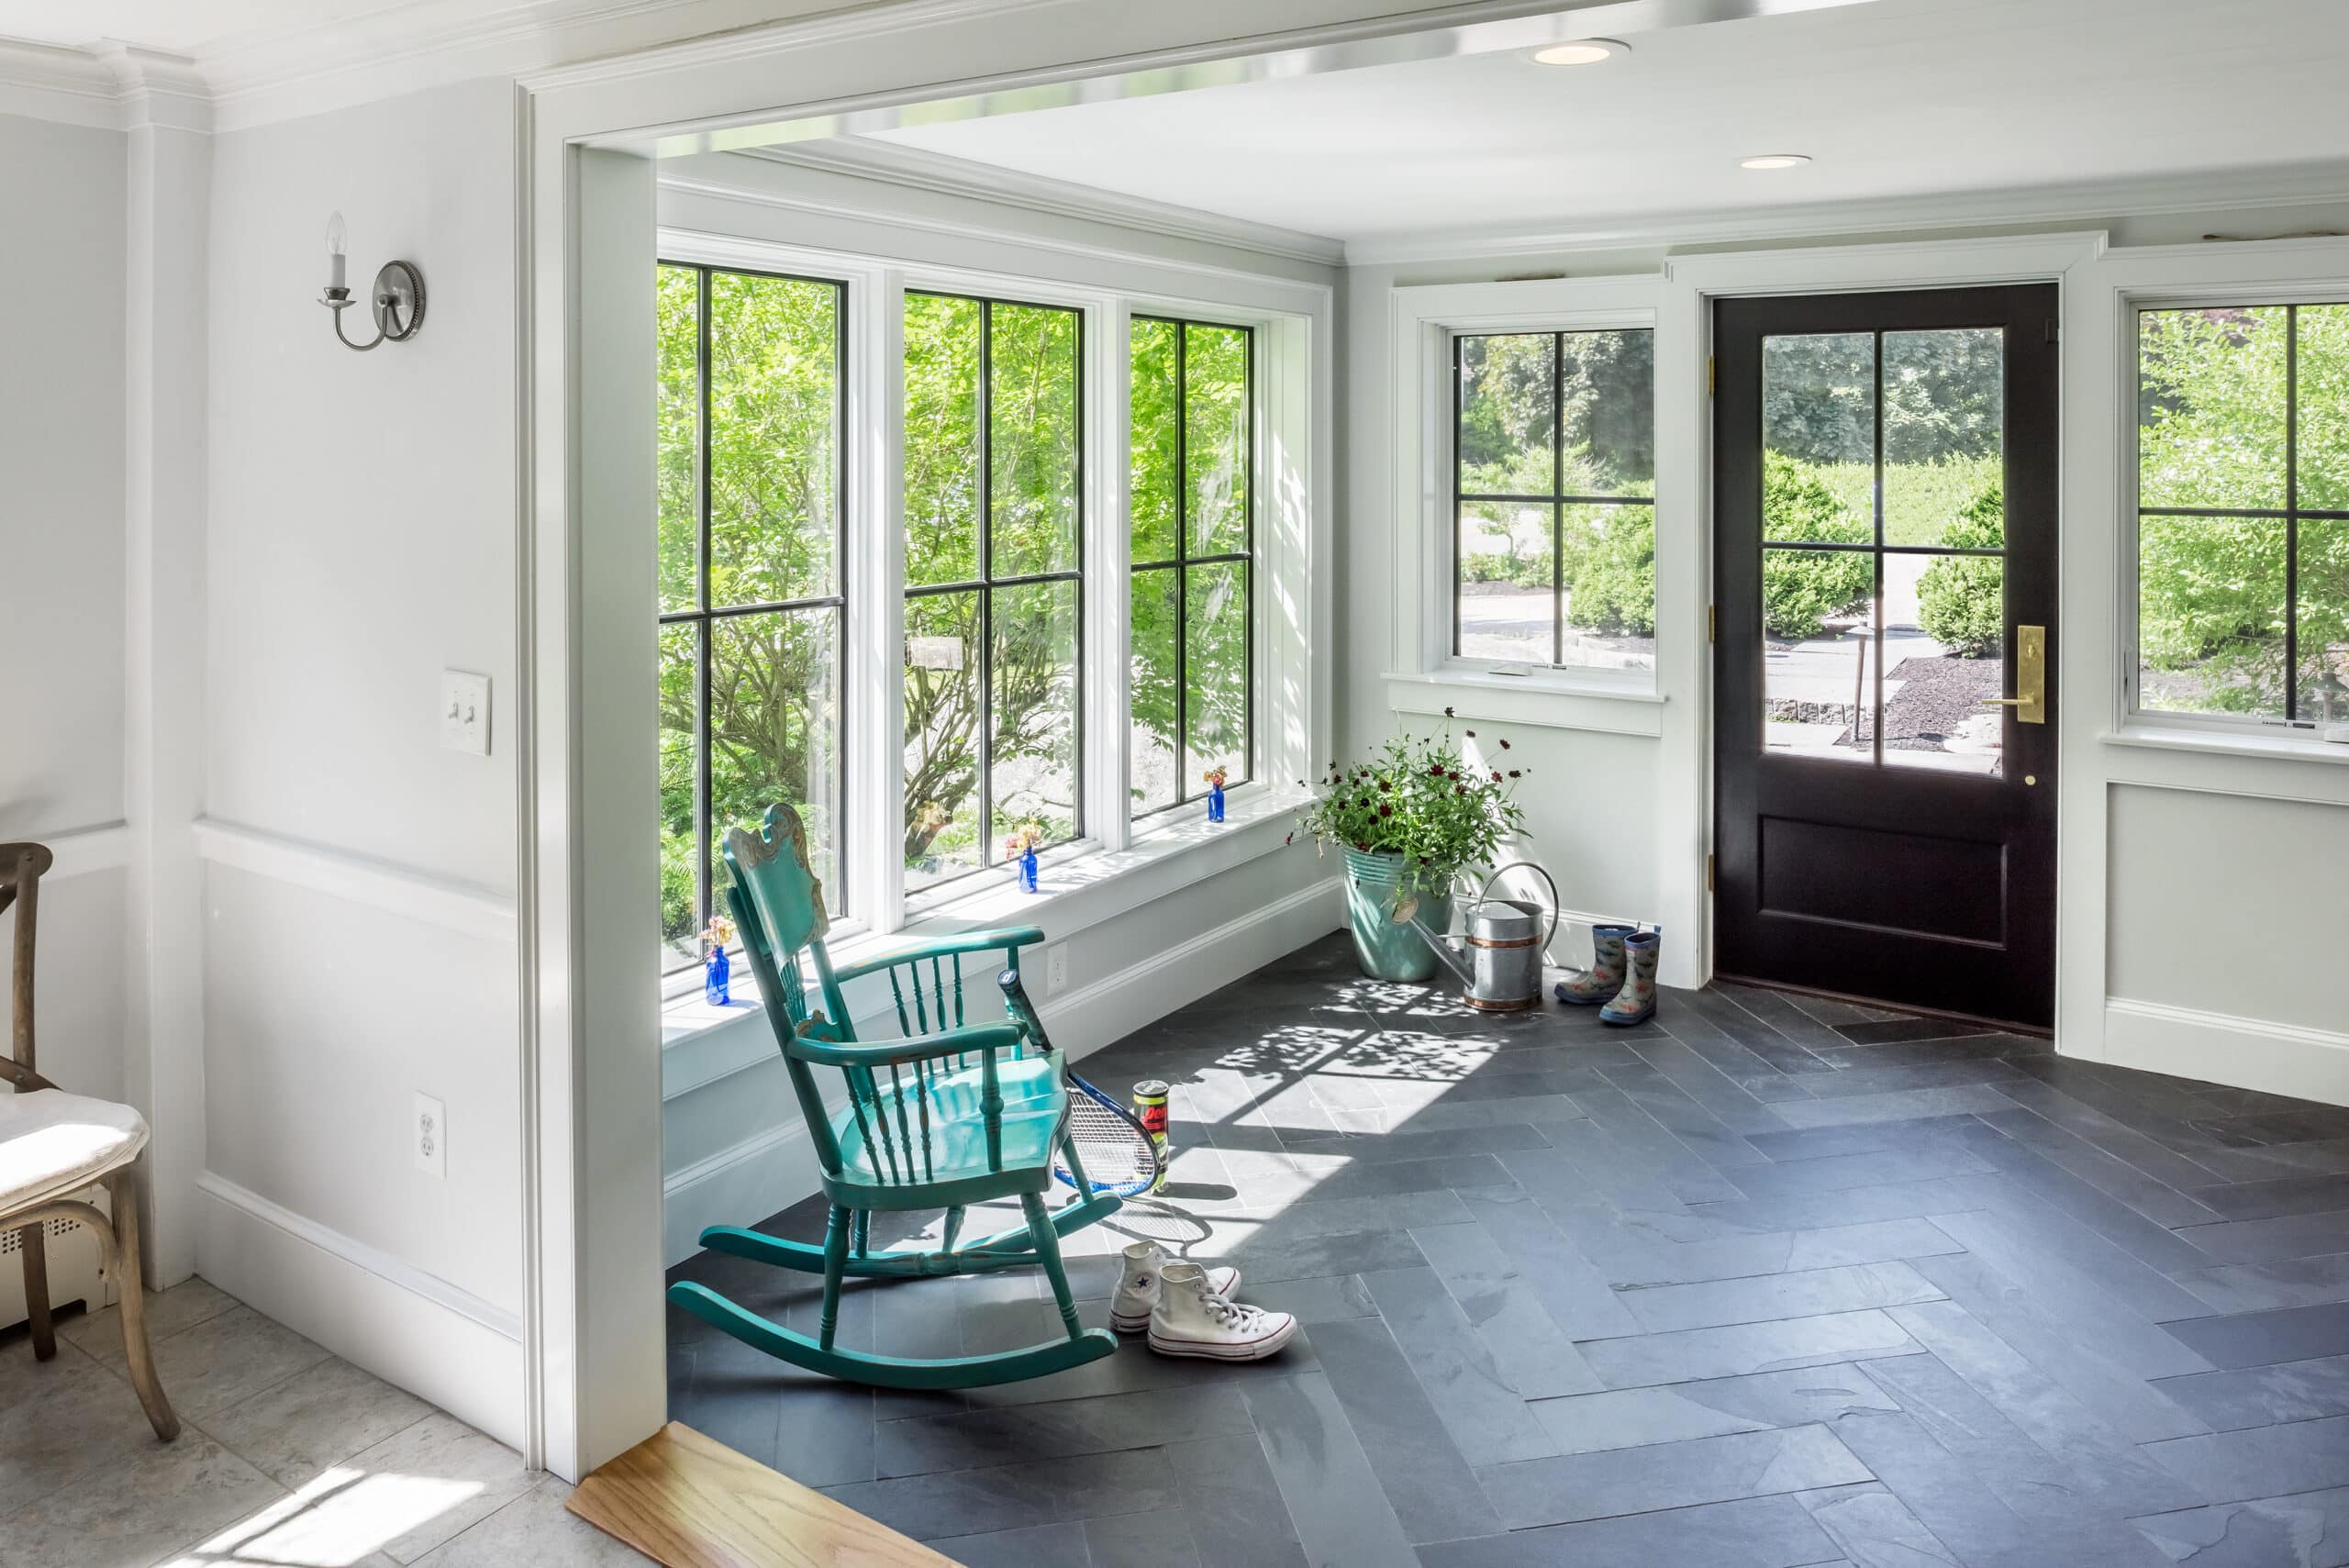 Natural light floods into this home in Tiverton Rhode Island